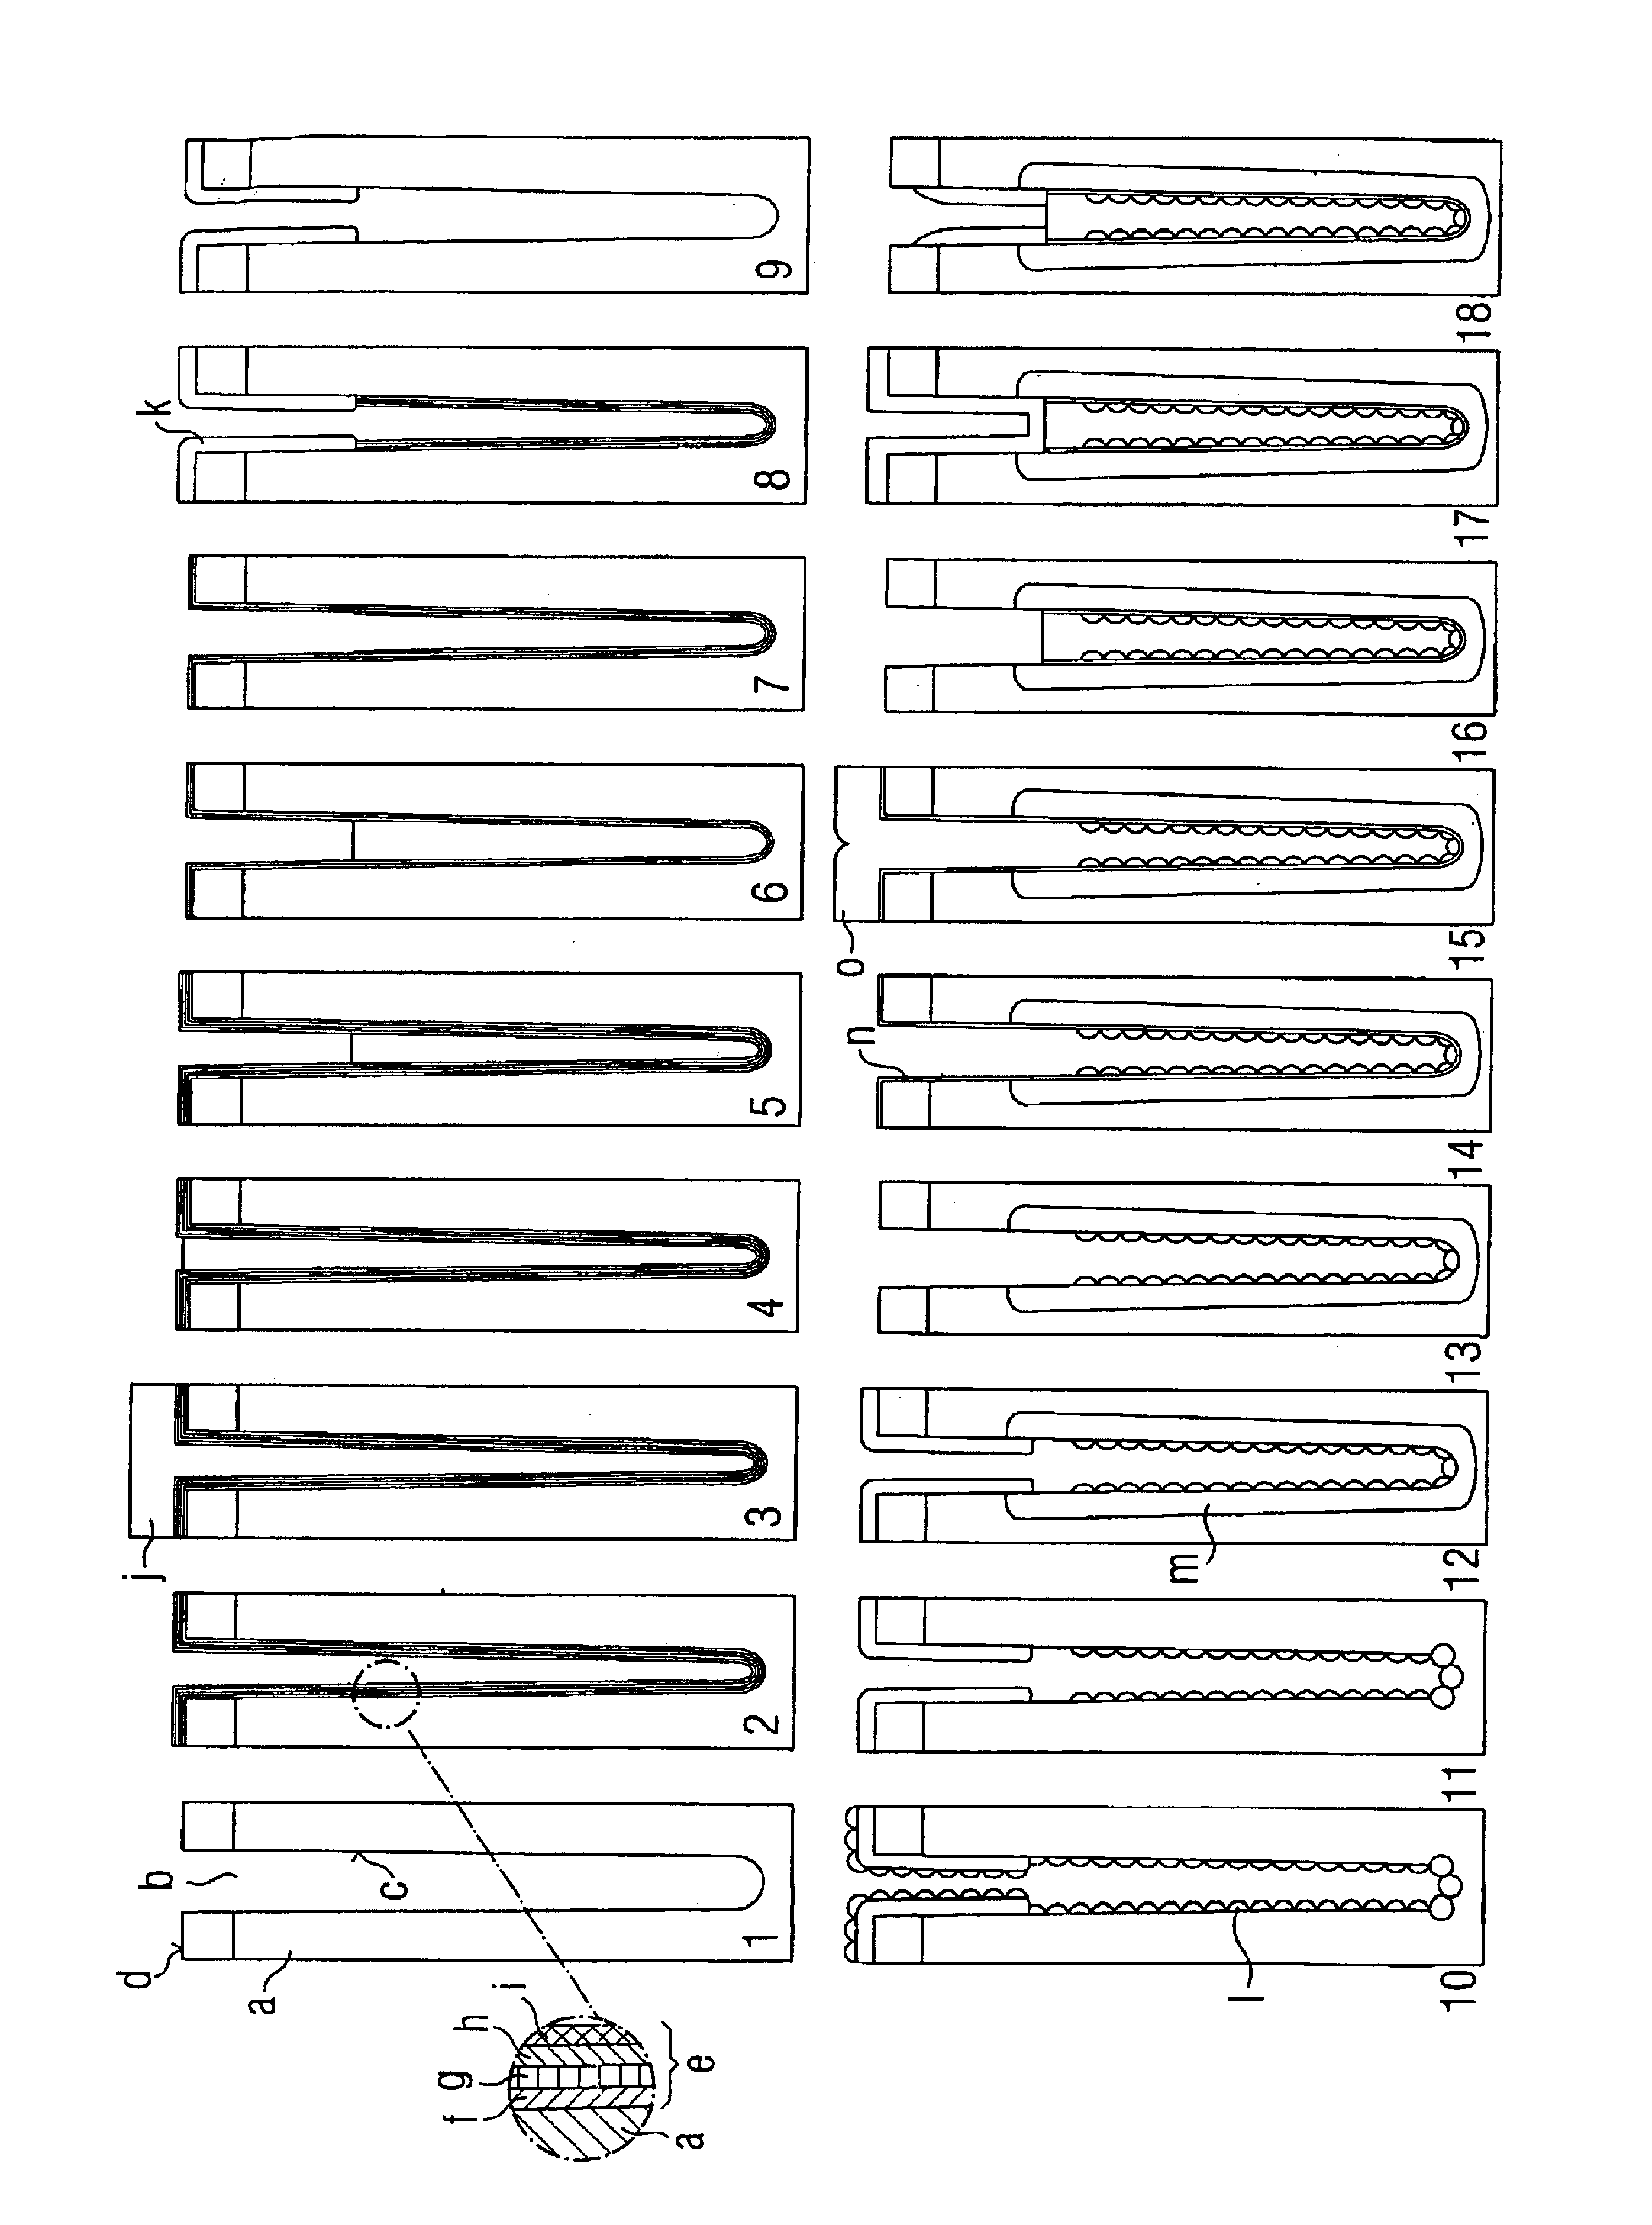 Method for fabricating a deep trench capacitor for dynamic memory cells